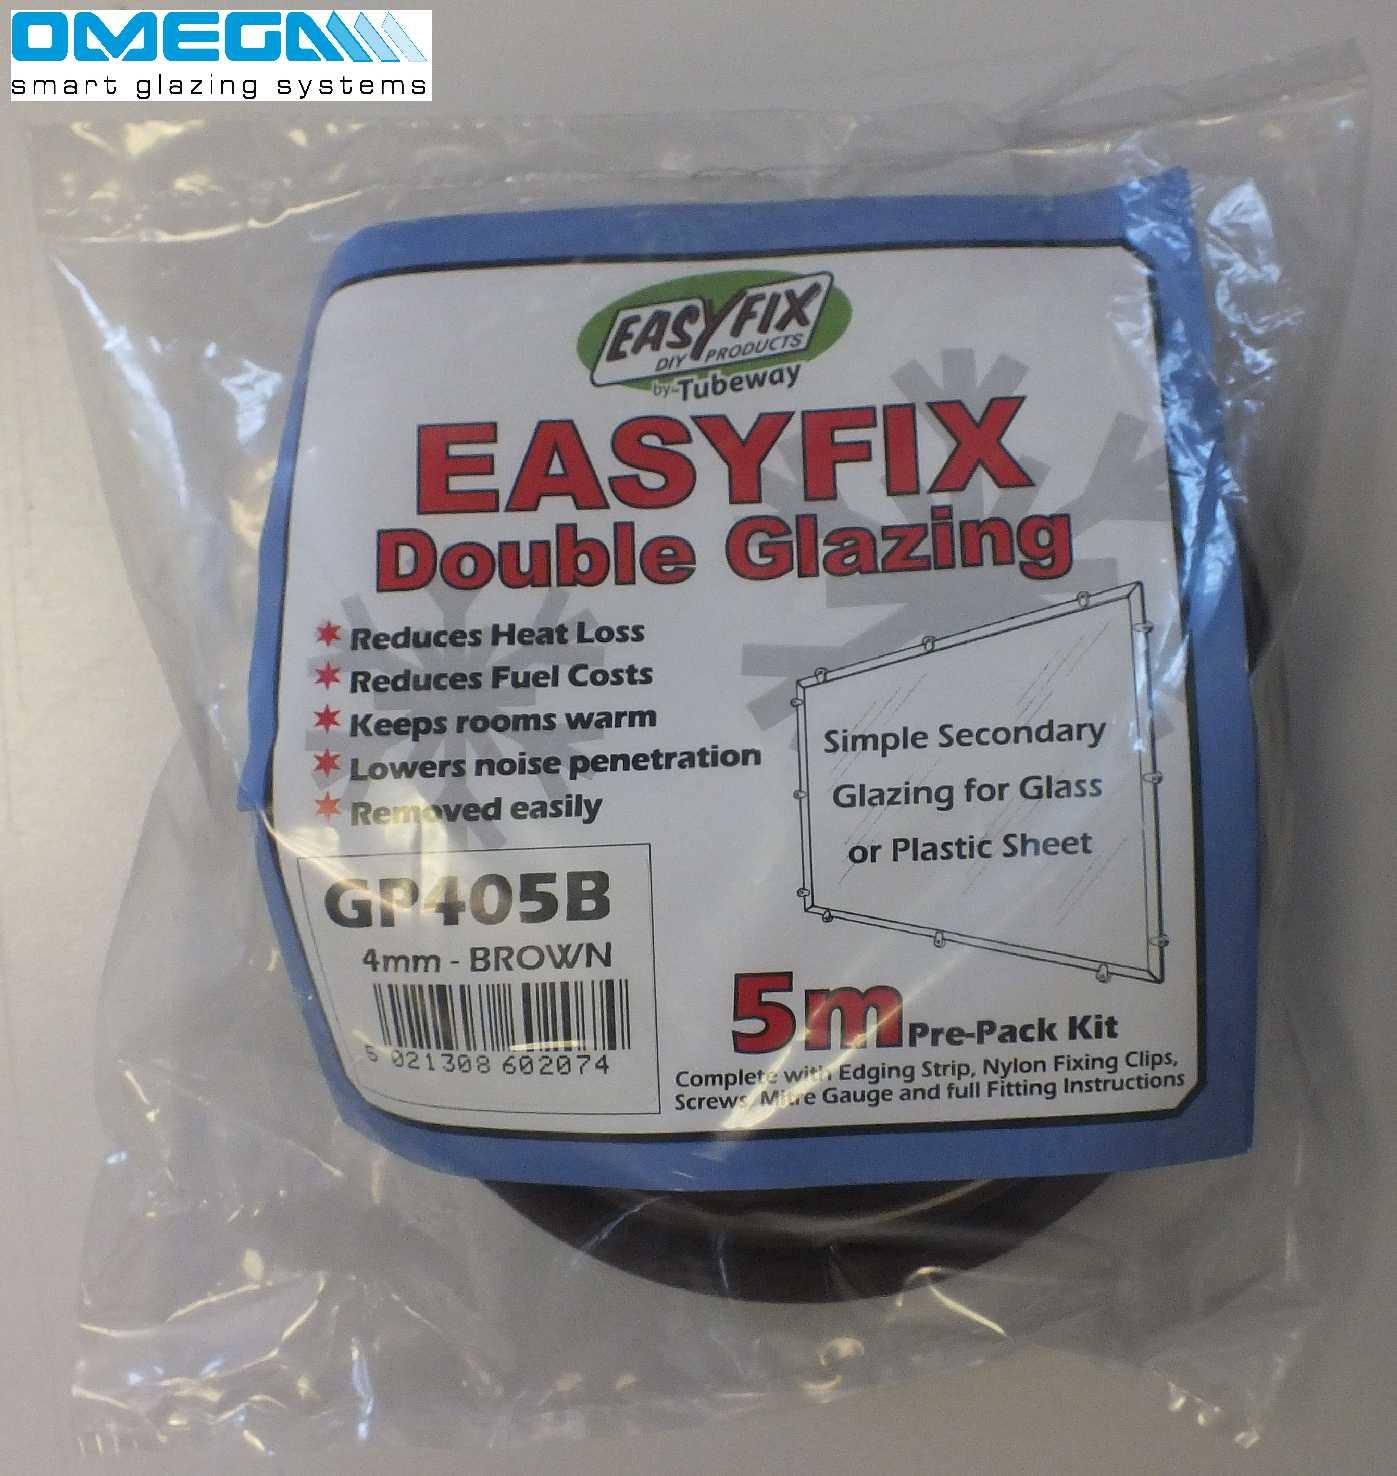 Easyfix Clipglaze Edging Kit - 5m roll of edging for 3mm Glazing Thickness, White, Clear or Brown from Omega Build